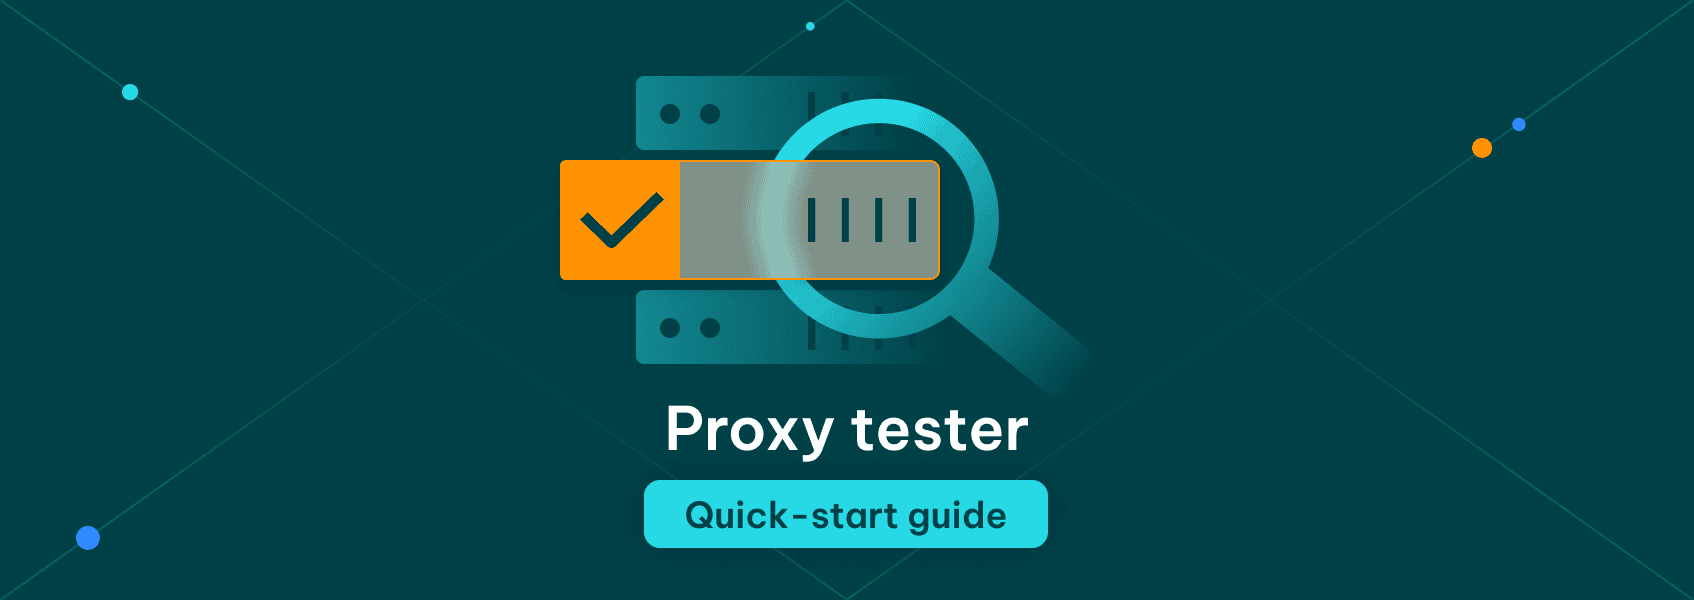 proxy tester quick-start guide featured